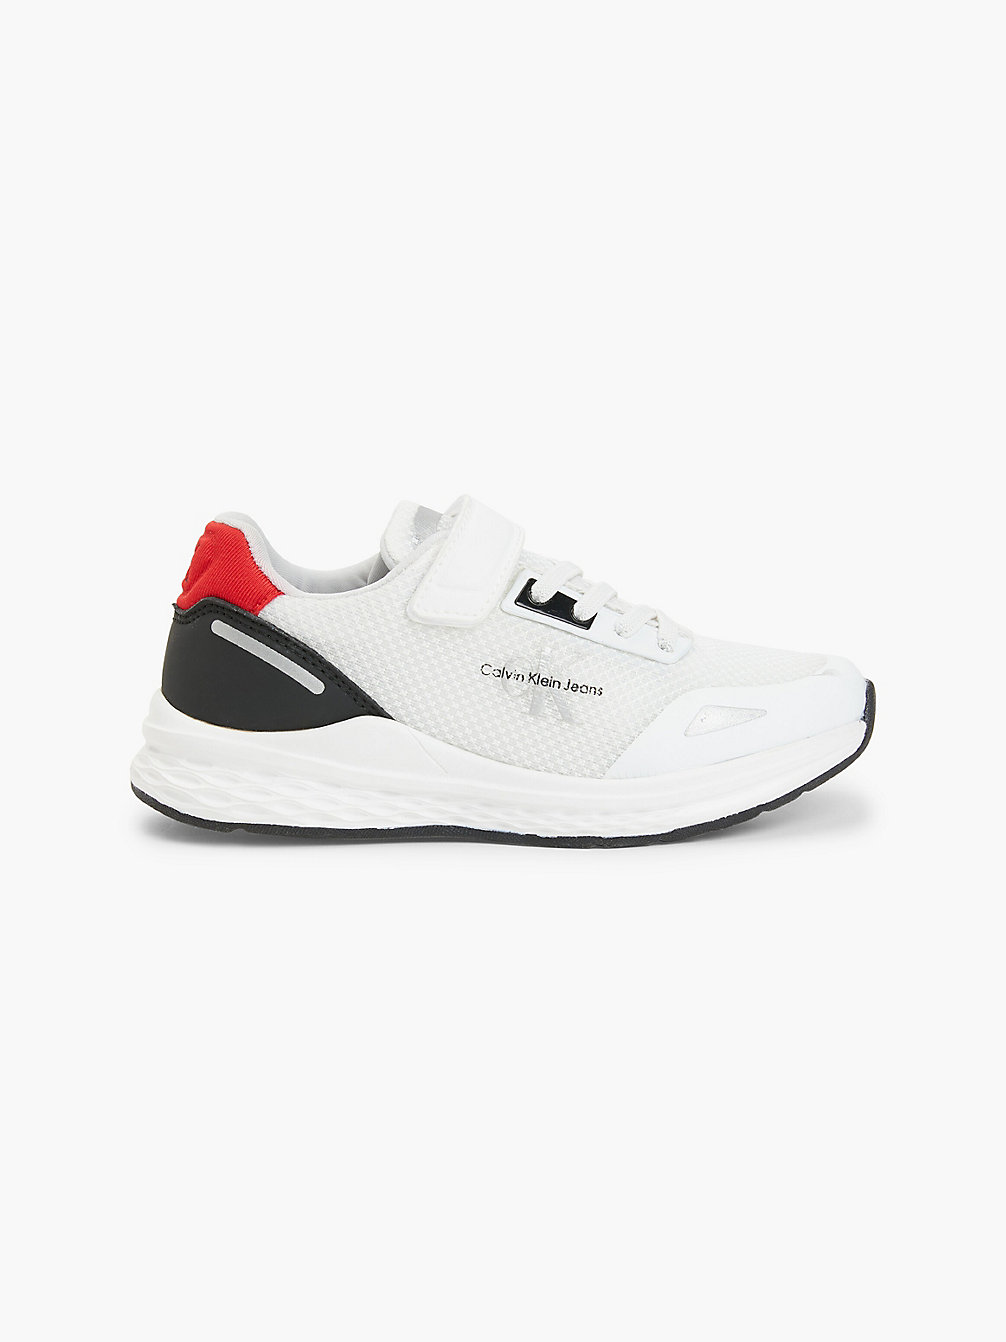 WHITE/RED Sneakers Aus Mesh undefined boys Calvin Klein